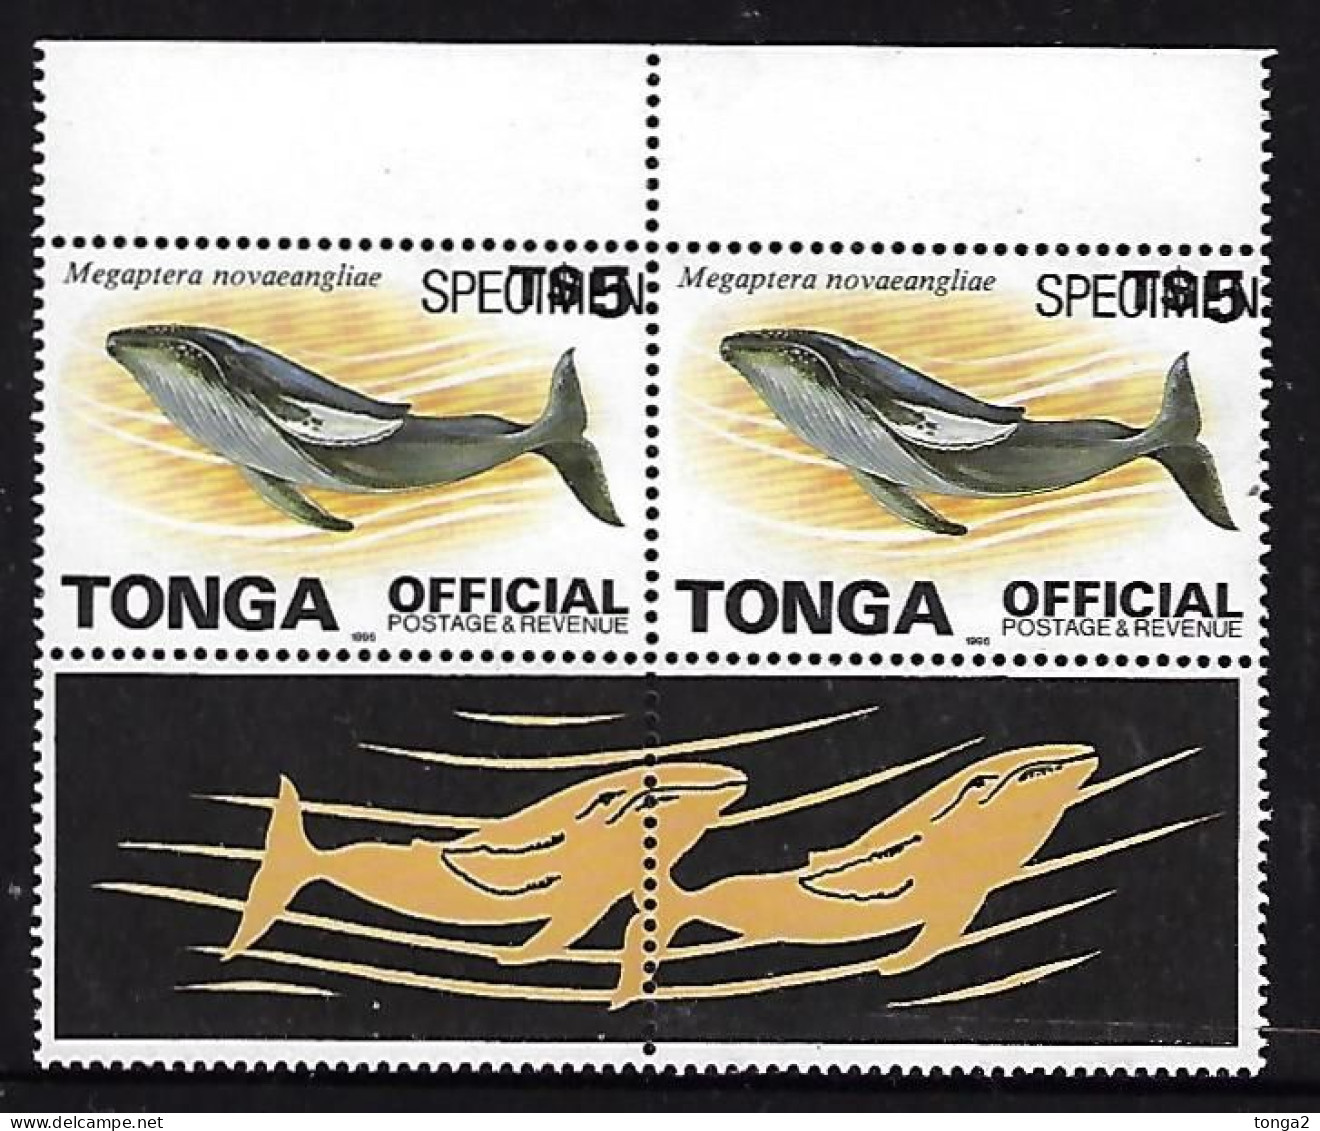 Tonga 1996 - $5.00 Whale Official Pair Ovptd Pecimen - Wale